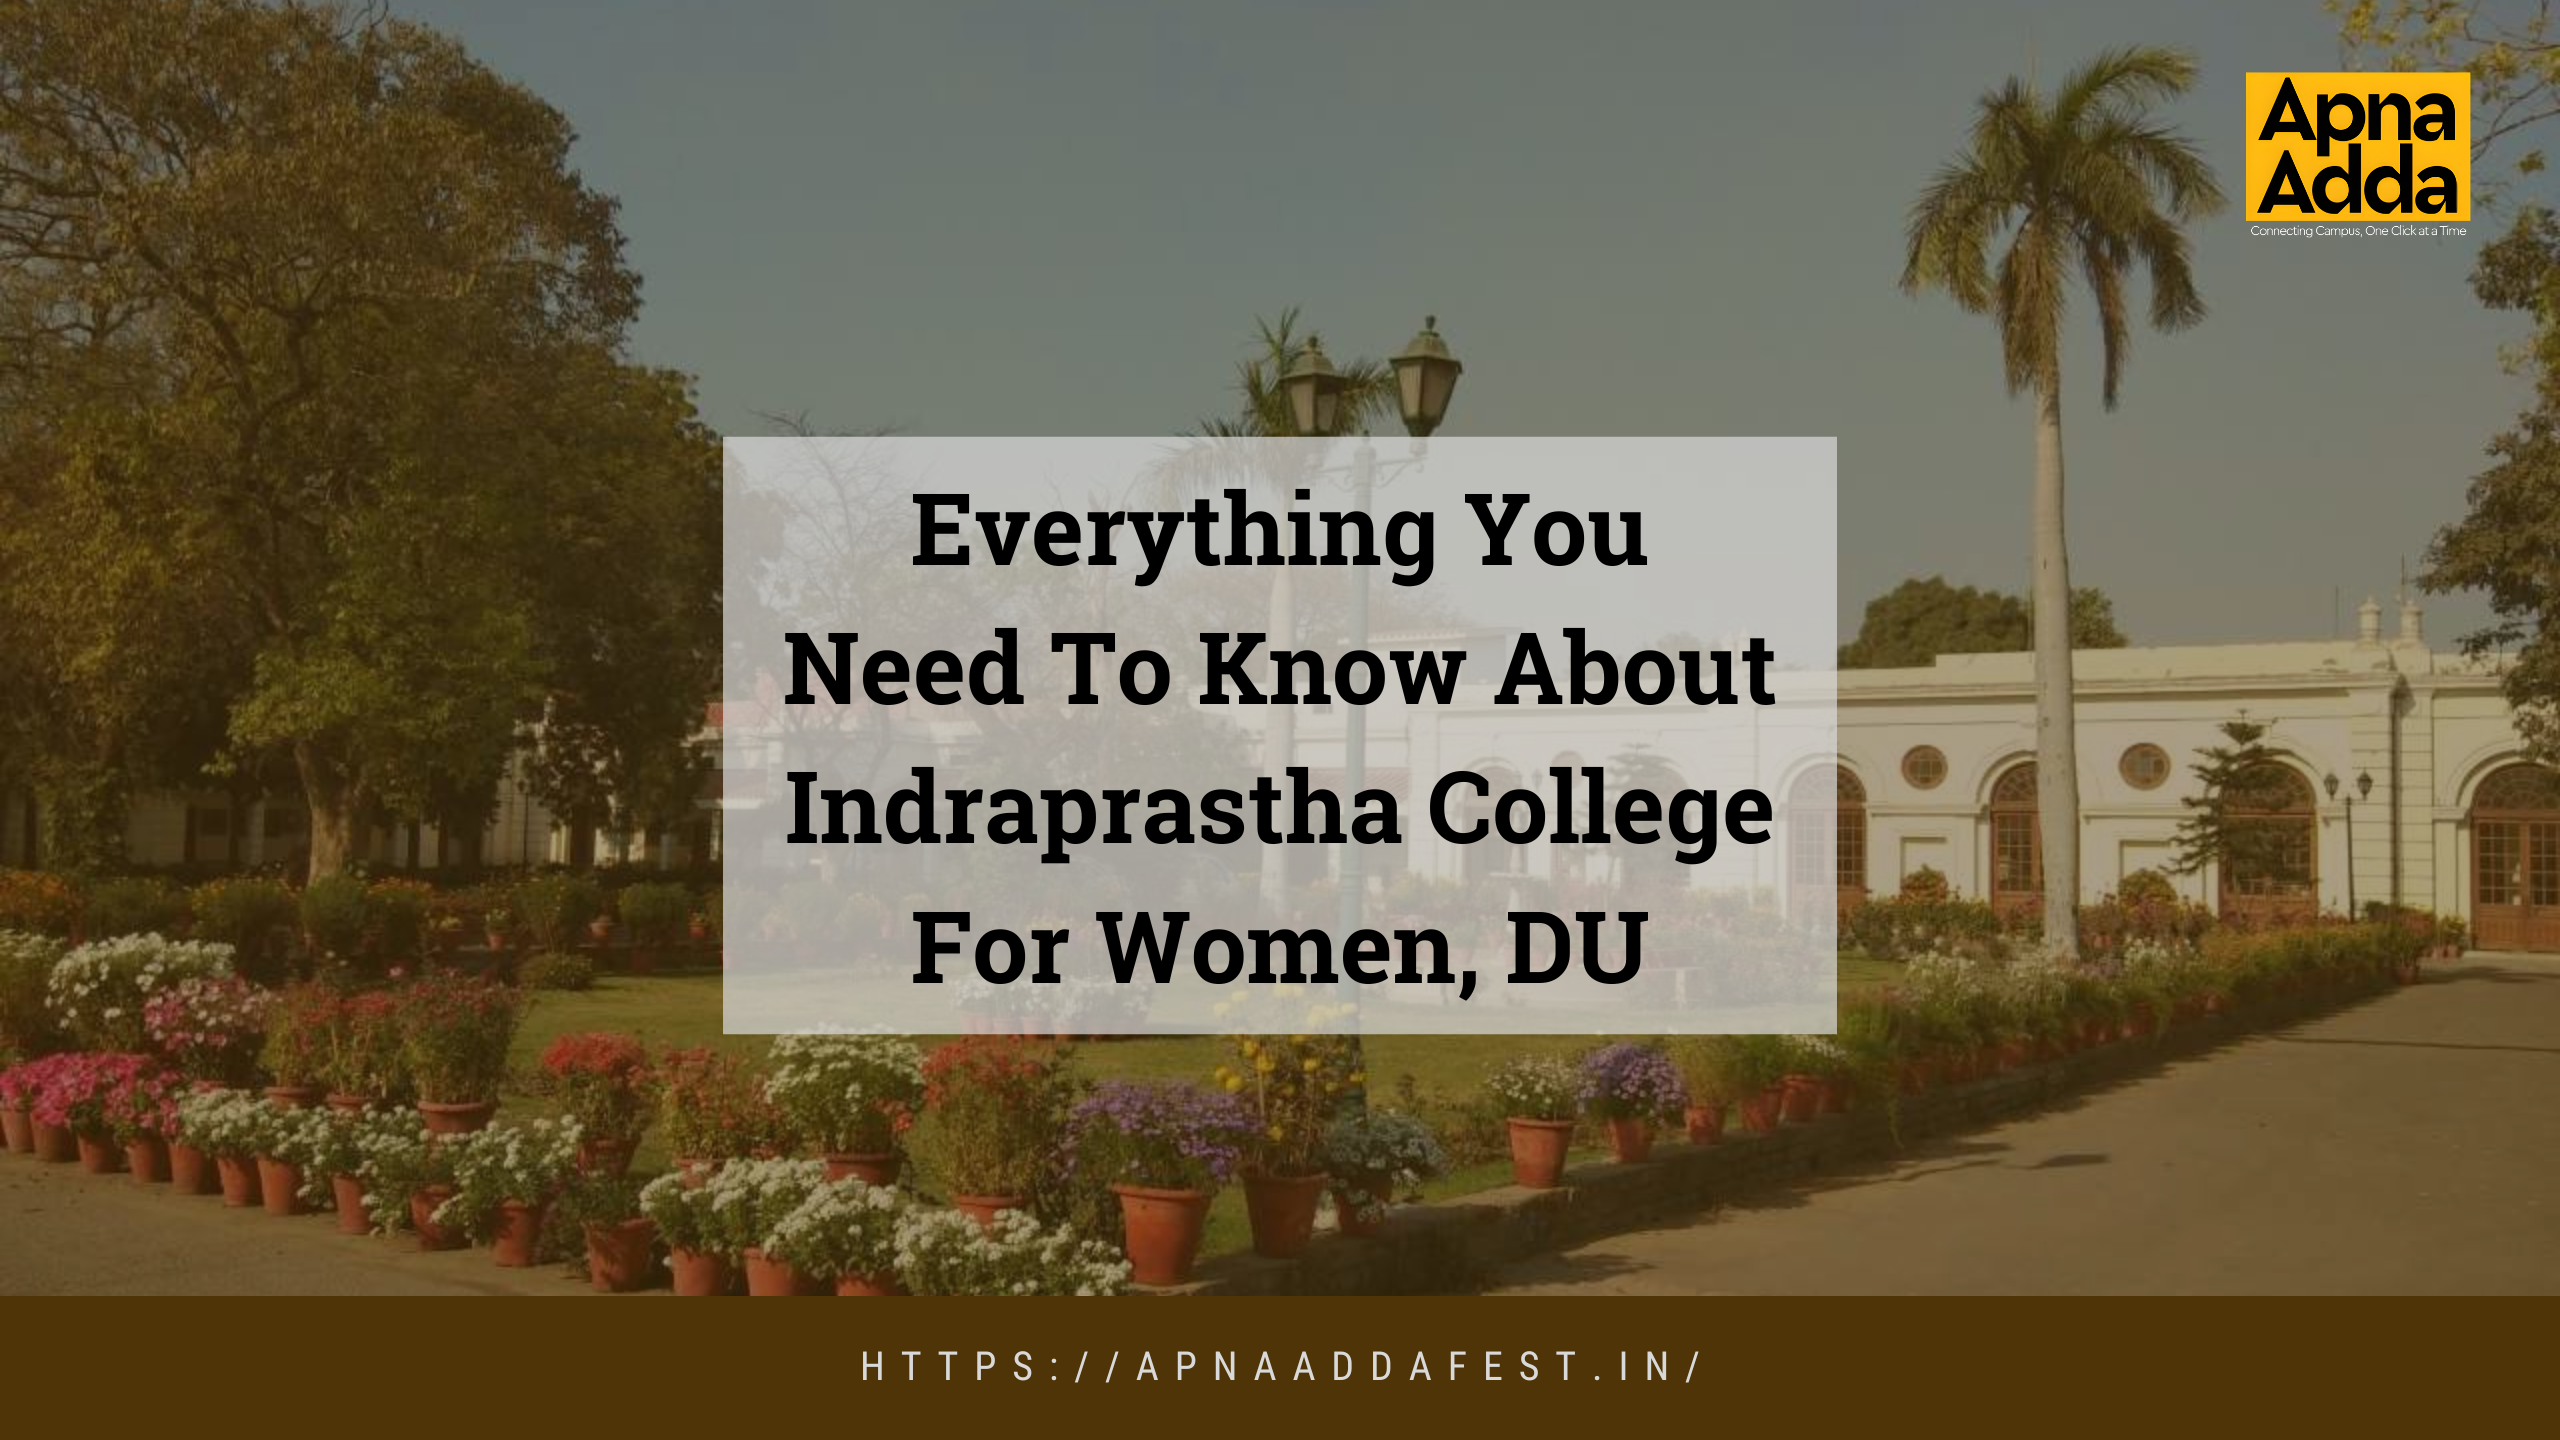 All You Need To Know About Indraprastha College For Women